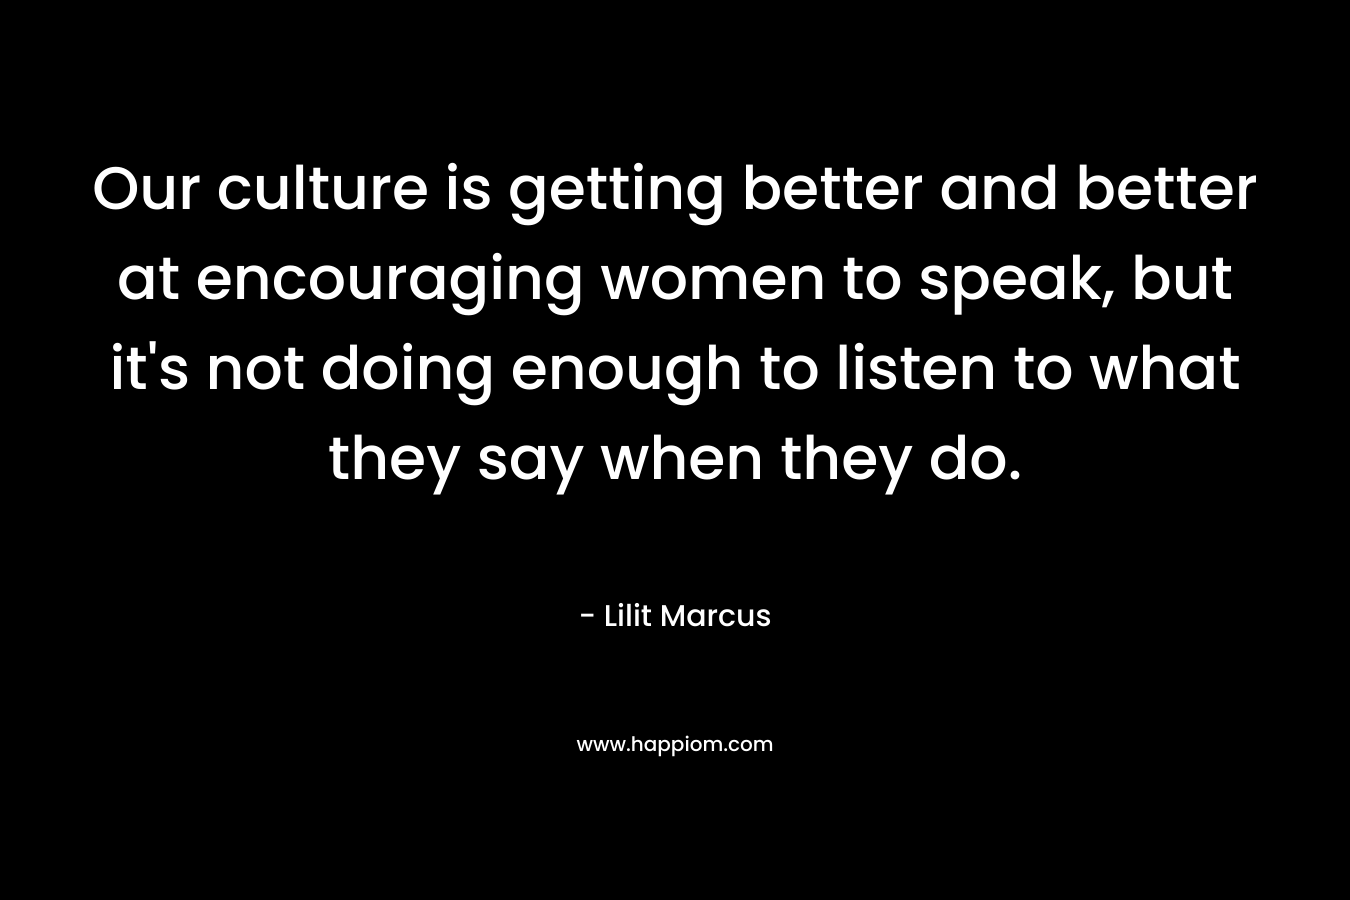 Our culture is getting better and better at encouraging women to speak, but it's not doing enough to listen to what they say when they do.